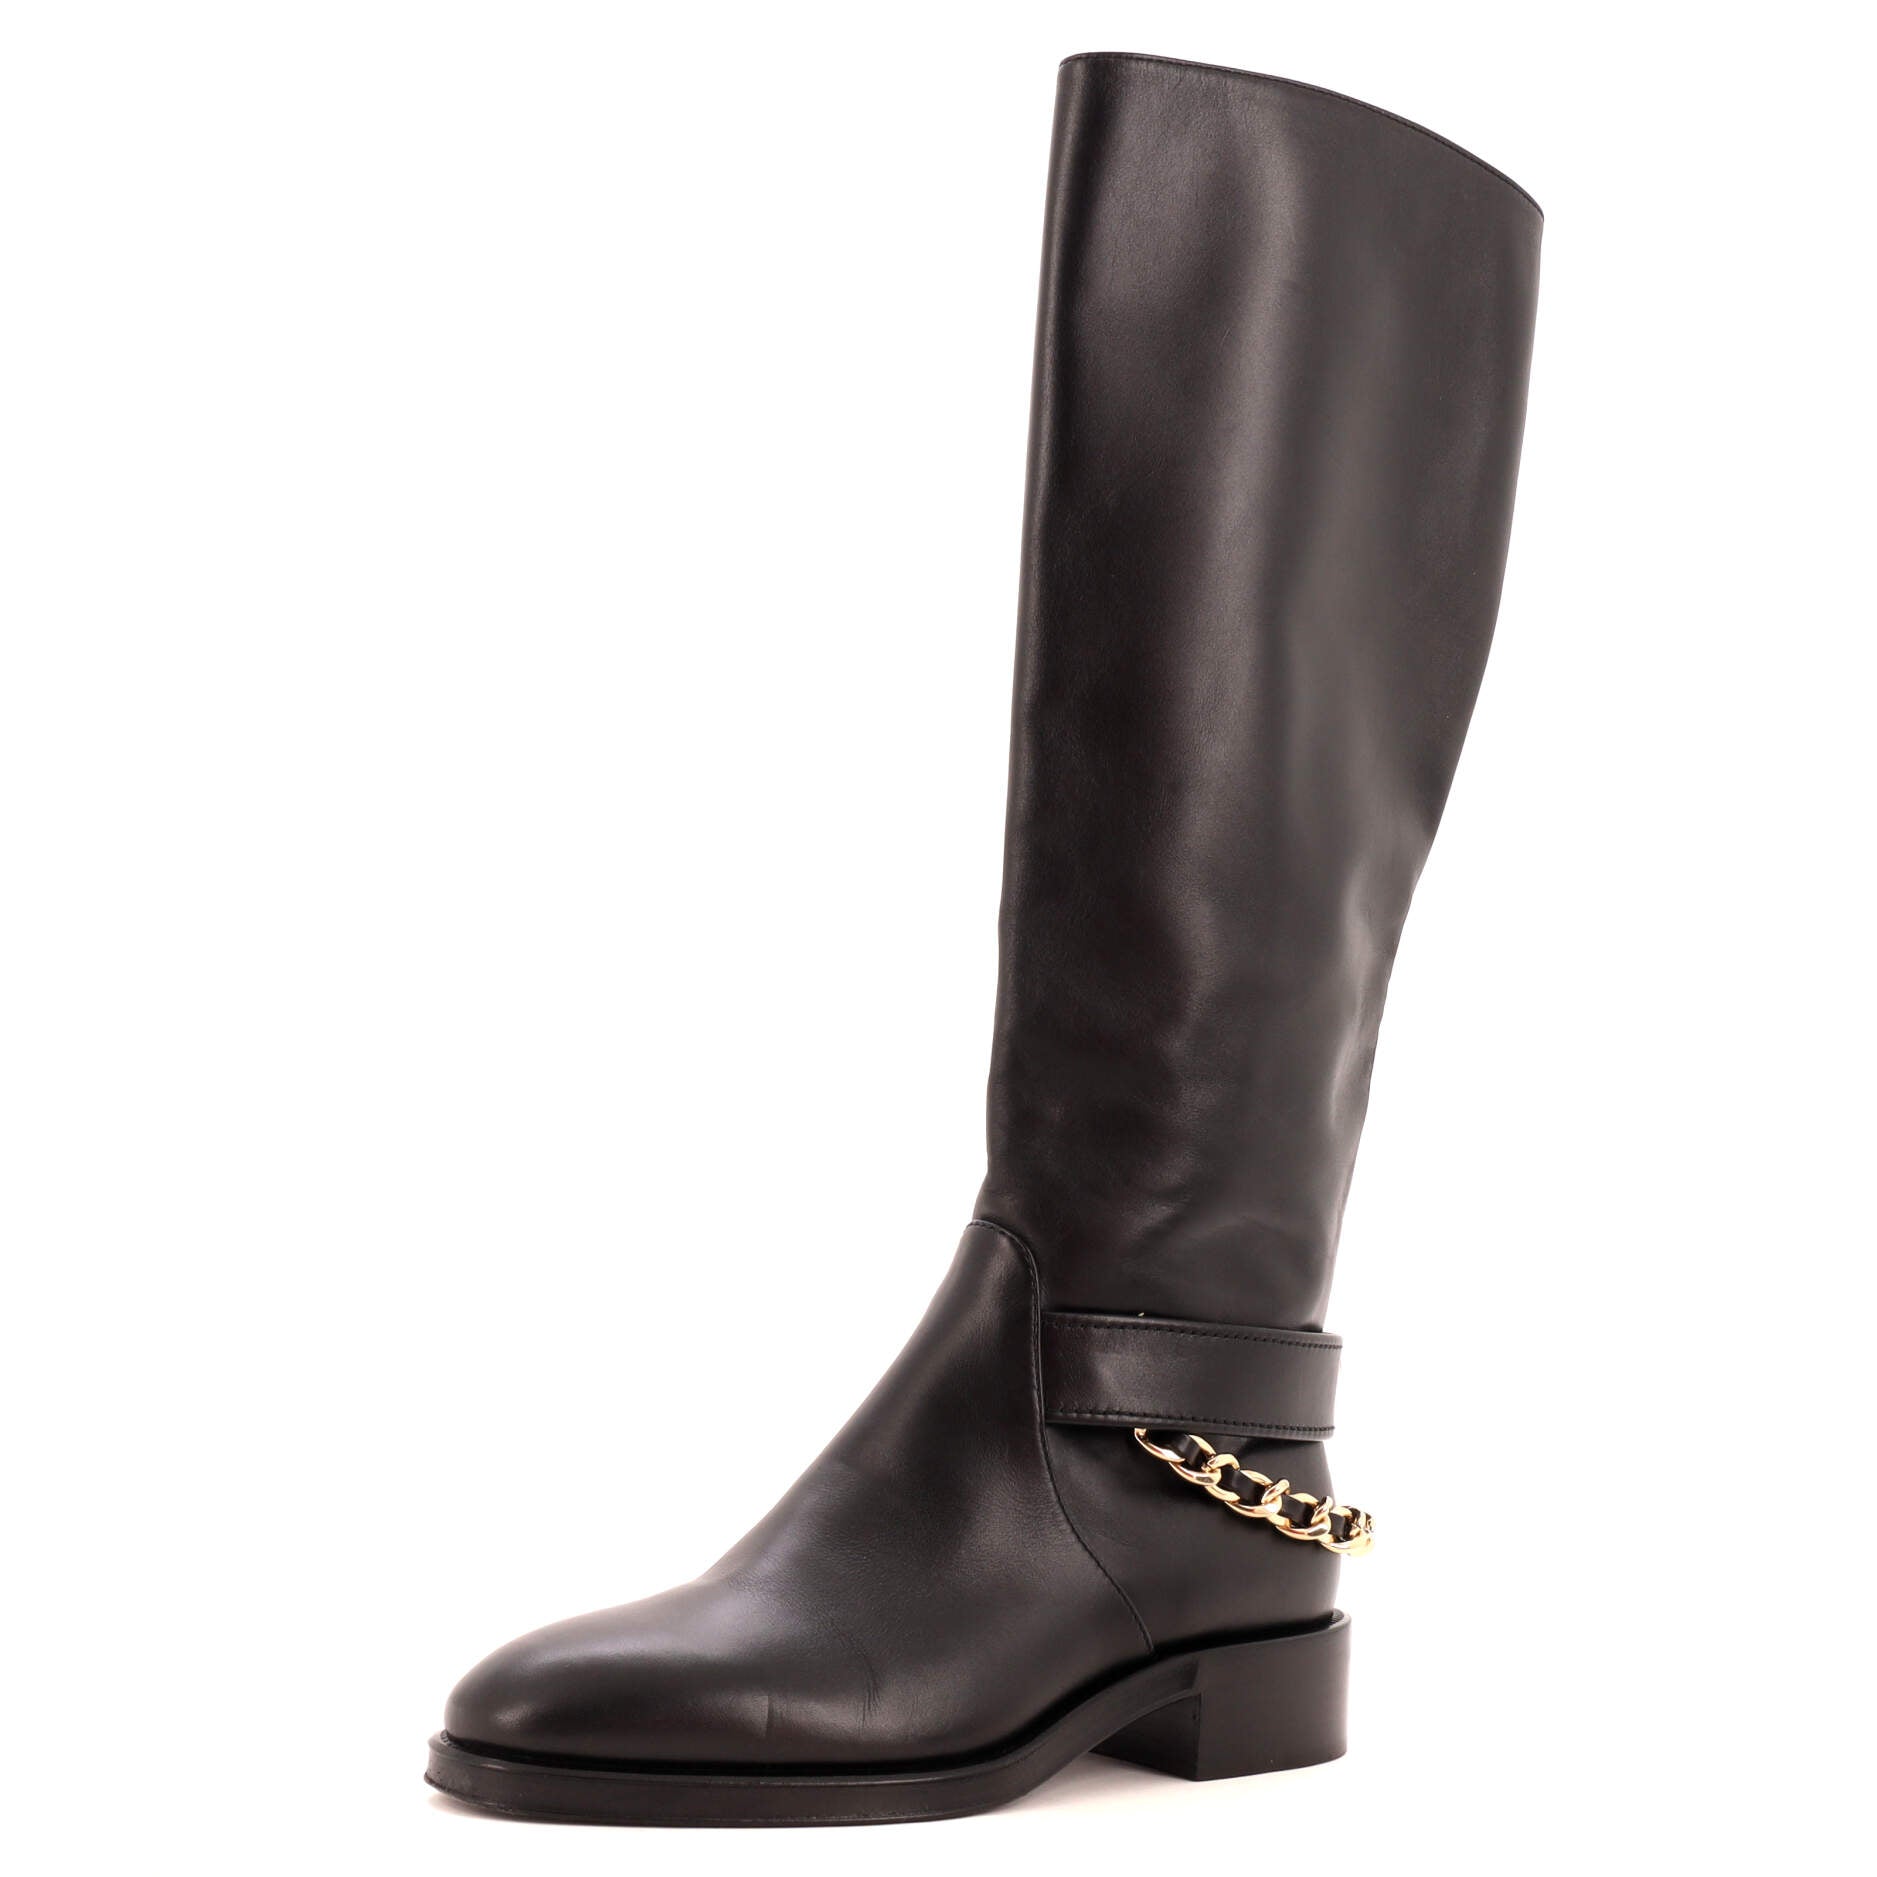 Women's CC Chain Knee High Riding Boots Leather